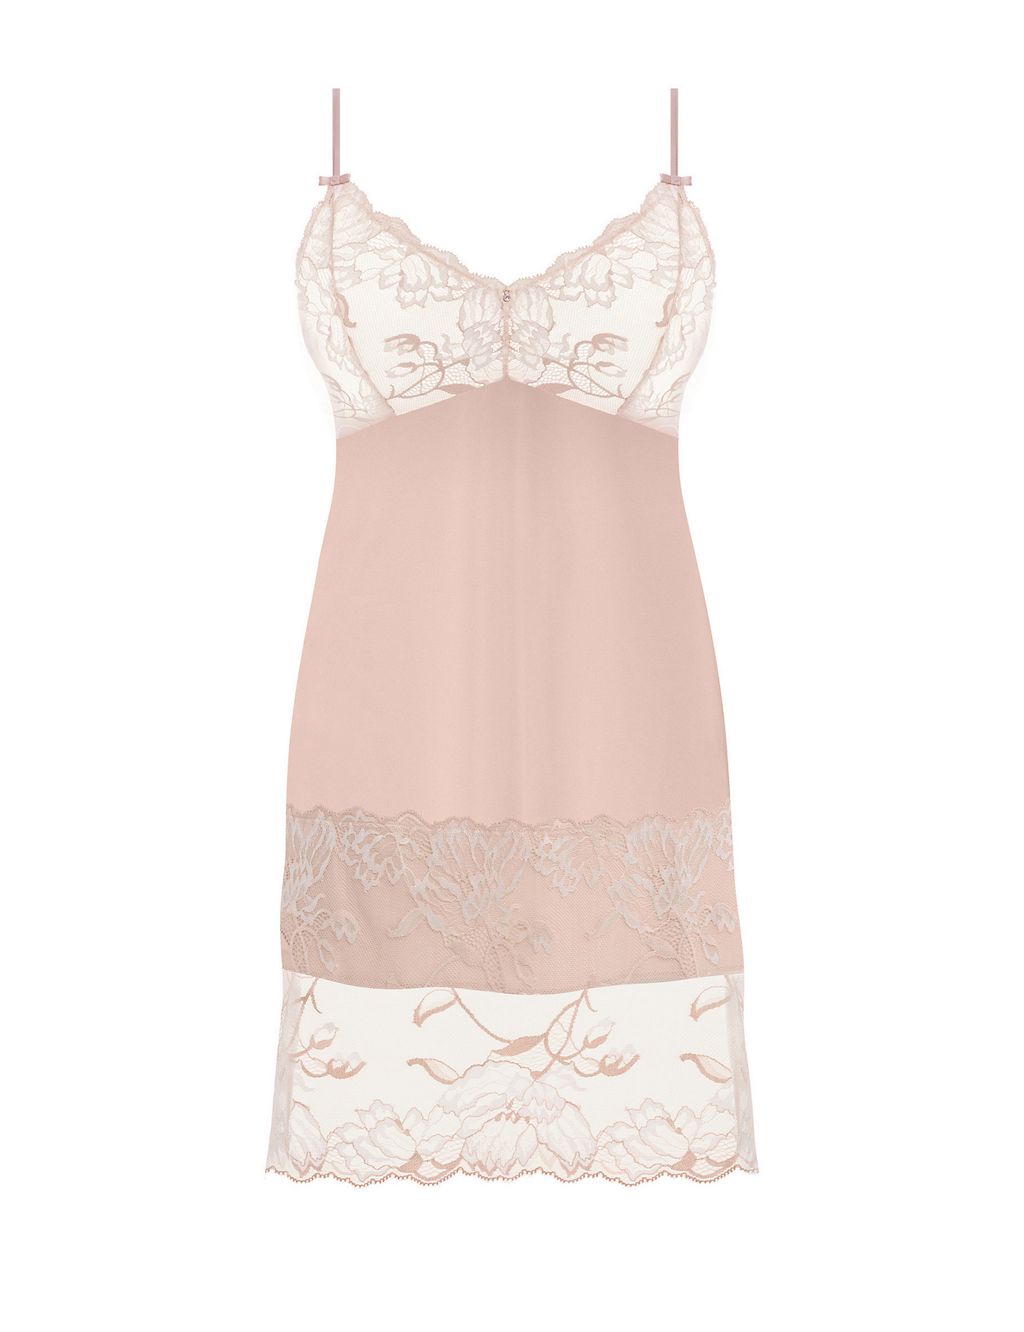 Aubree Strappy Lace Chemise 1 of 4